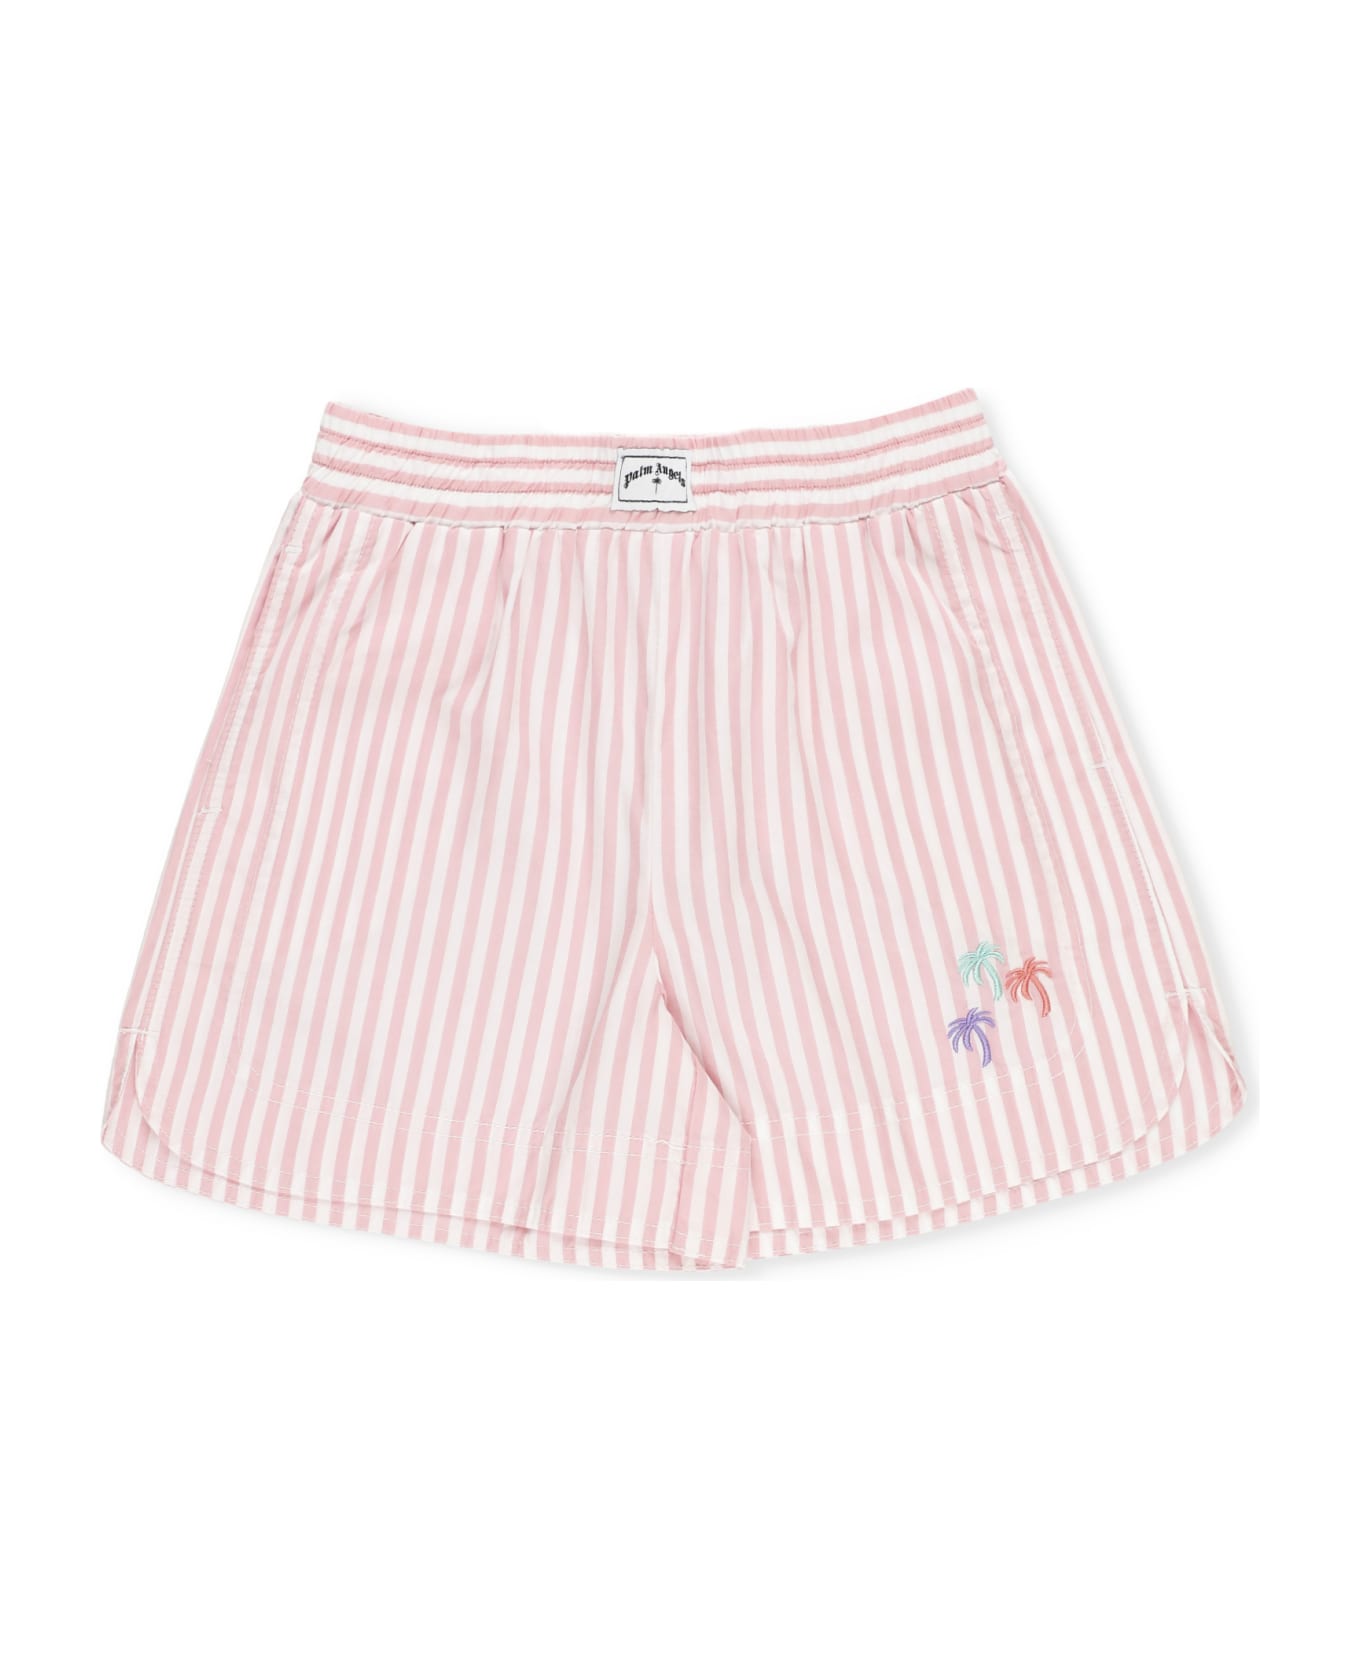 Palm Angels Striped Shorts - Pink ボトムス